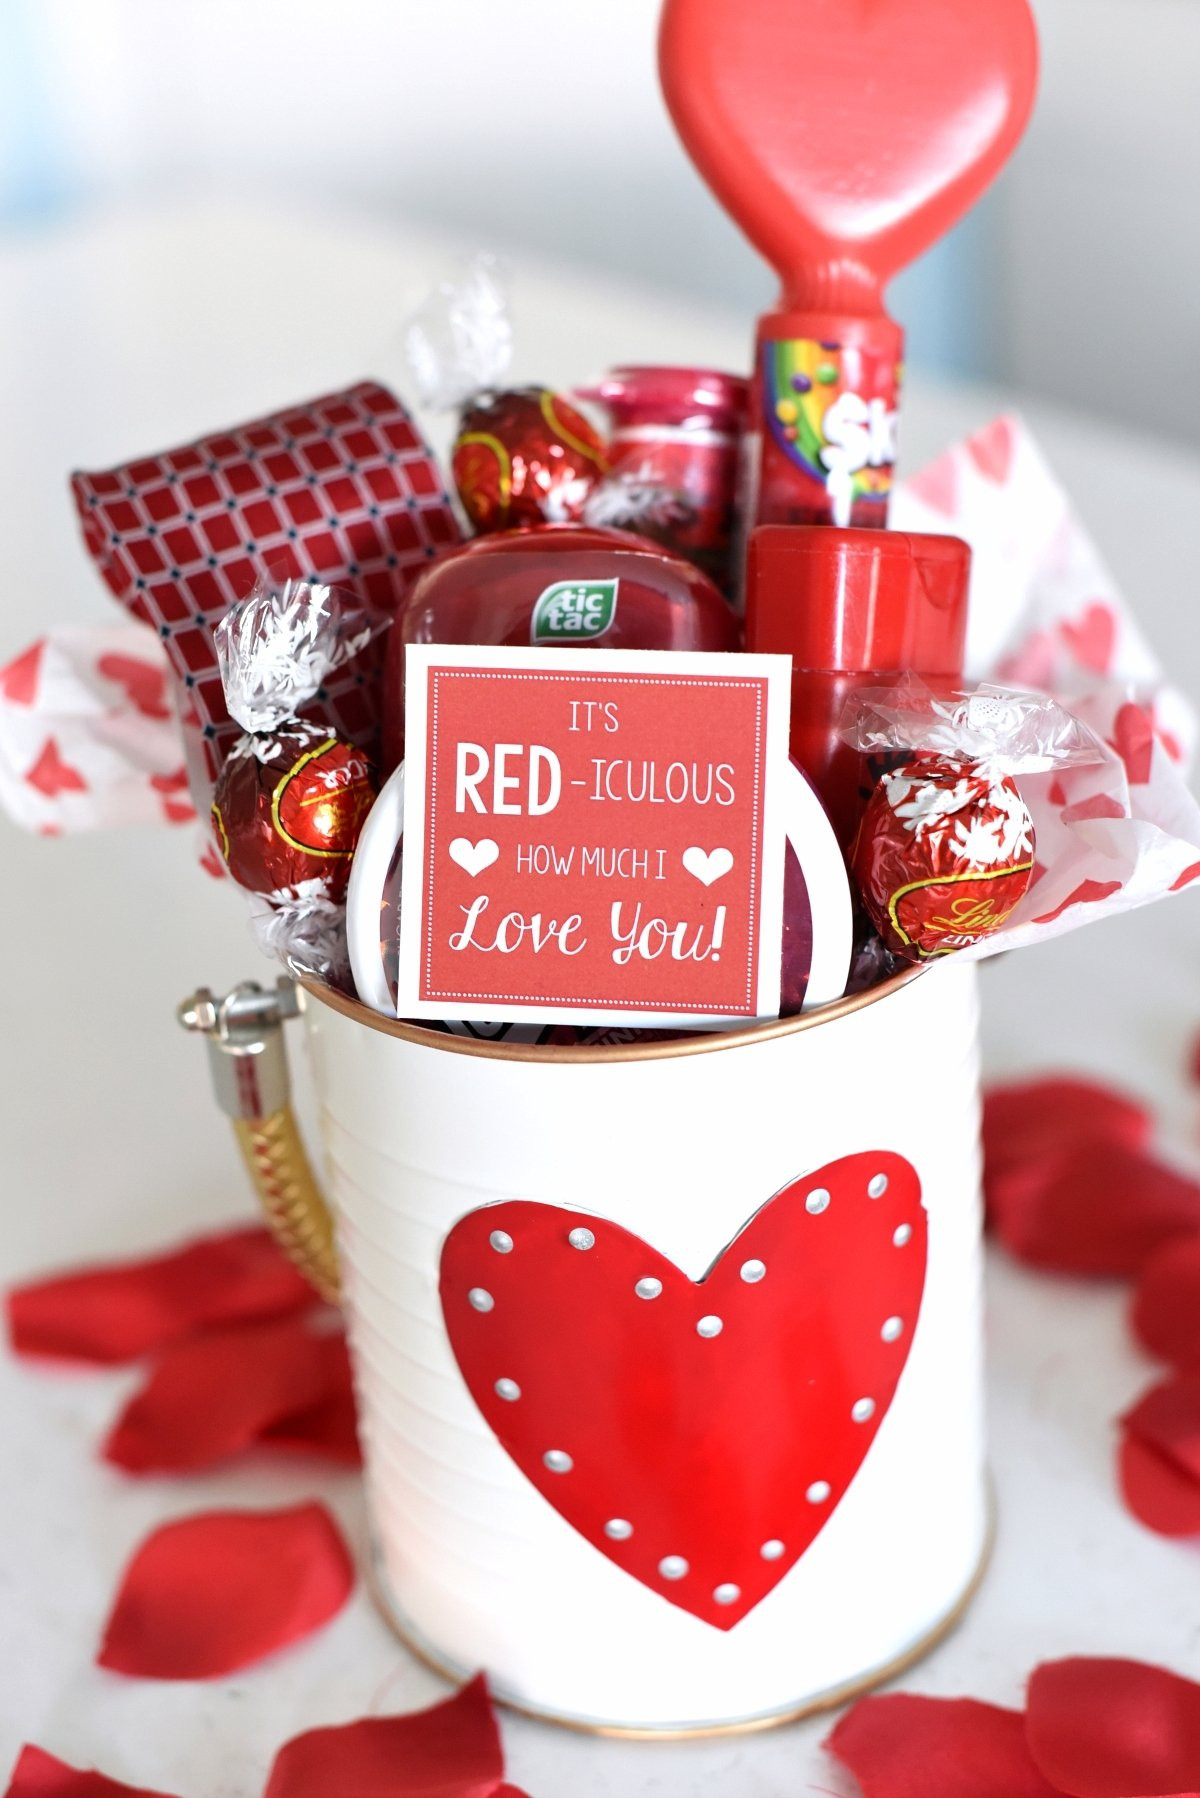 Creative Valentines Day Gifts
 10 Elegant Valentines Day Gift Ideas For Wife 2020